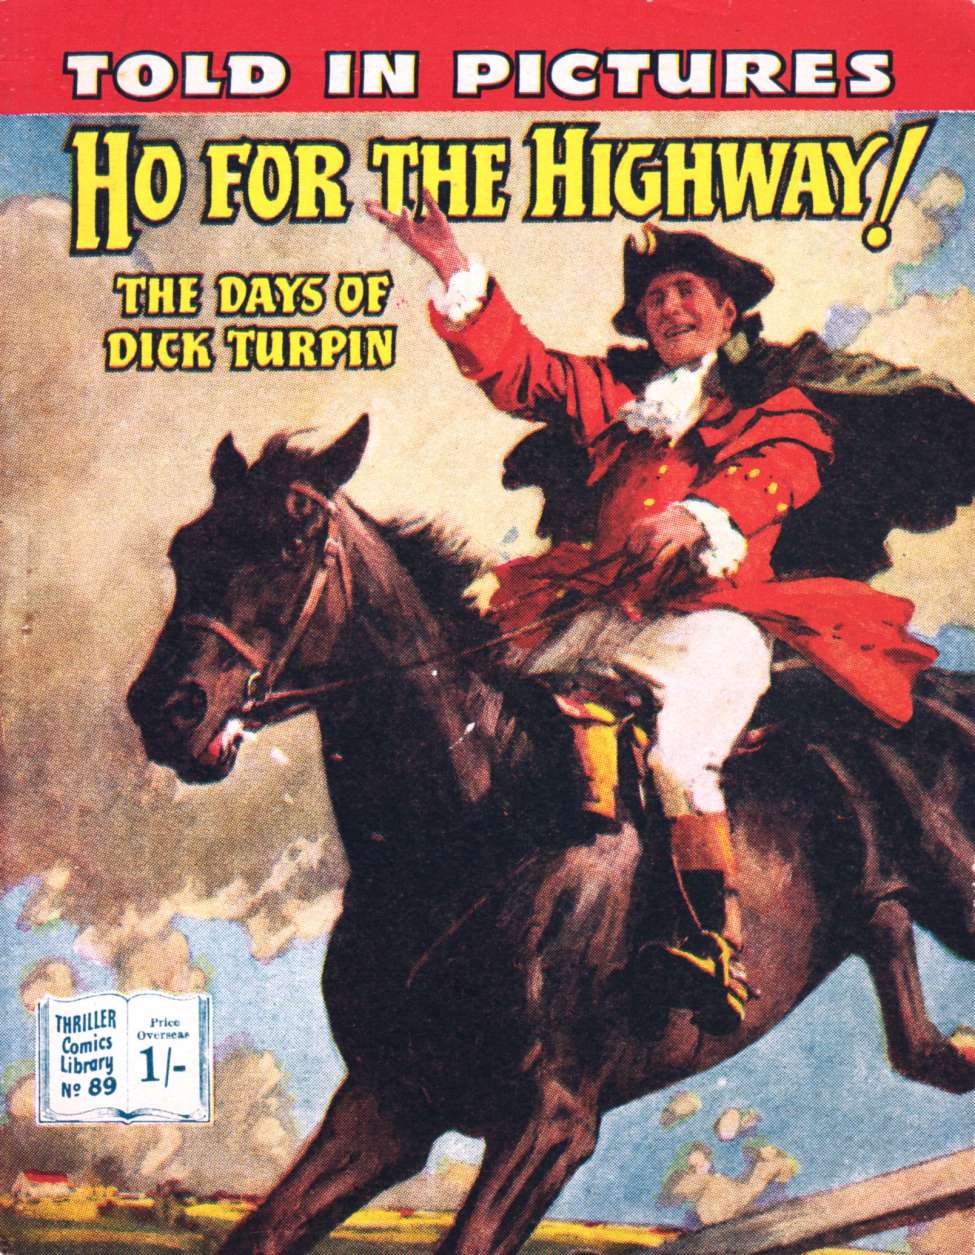 Book Cover For Thriller Comics Library 89 - Ho For The Highway!